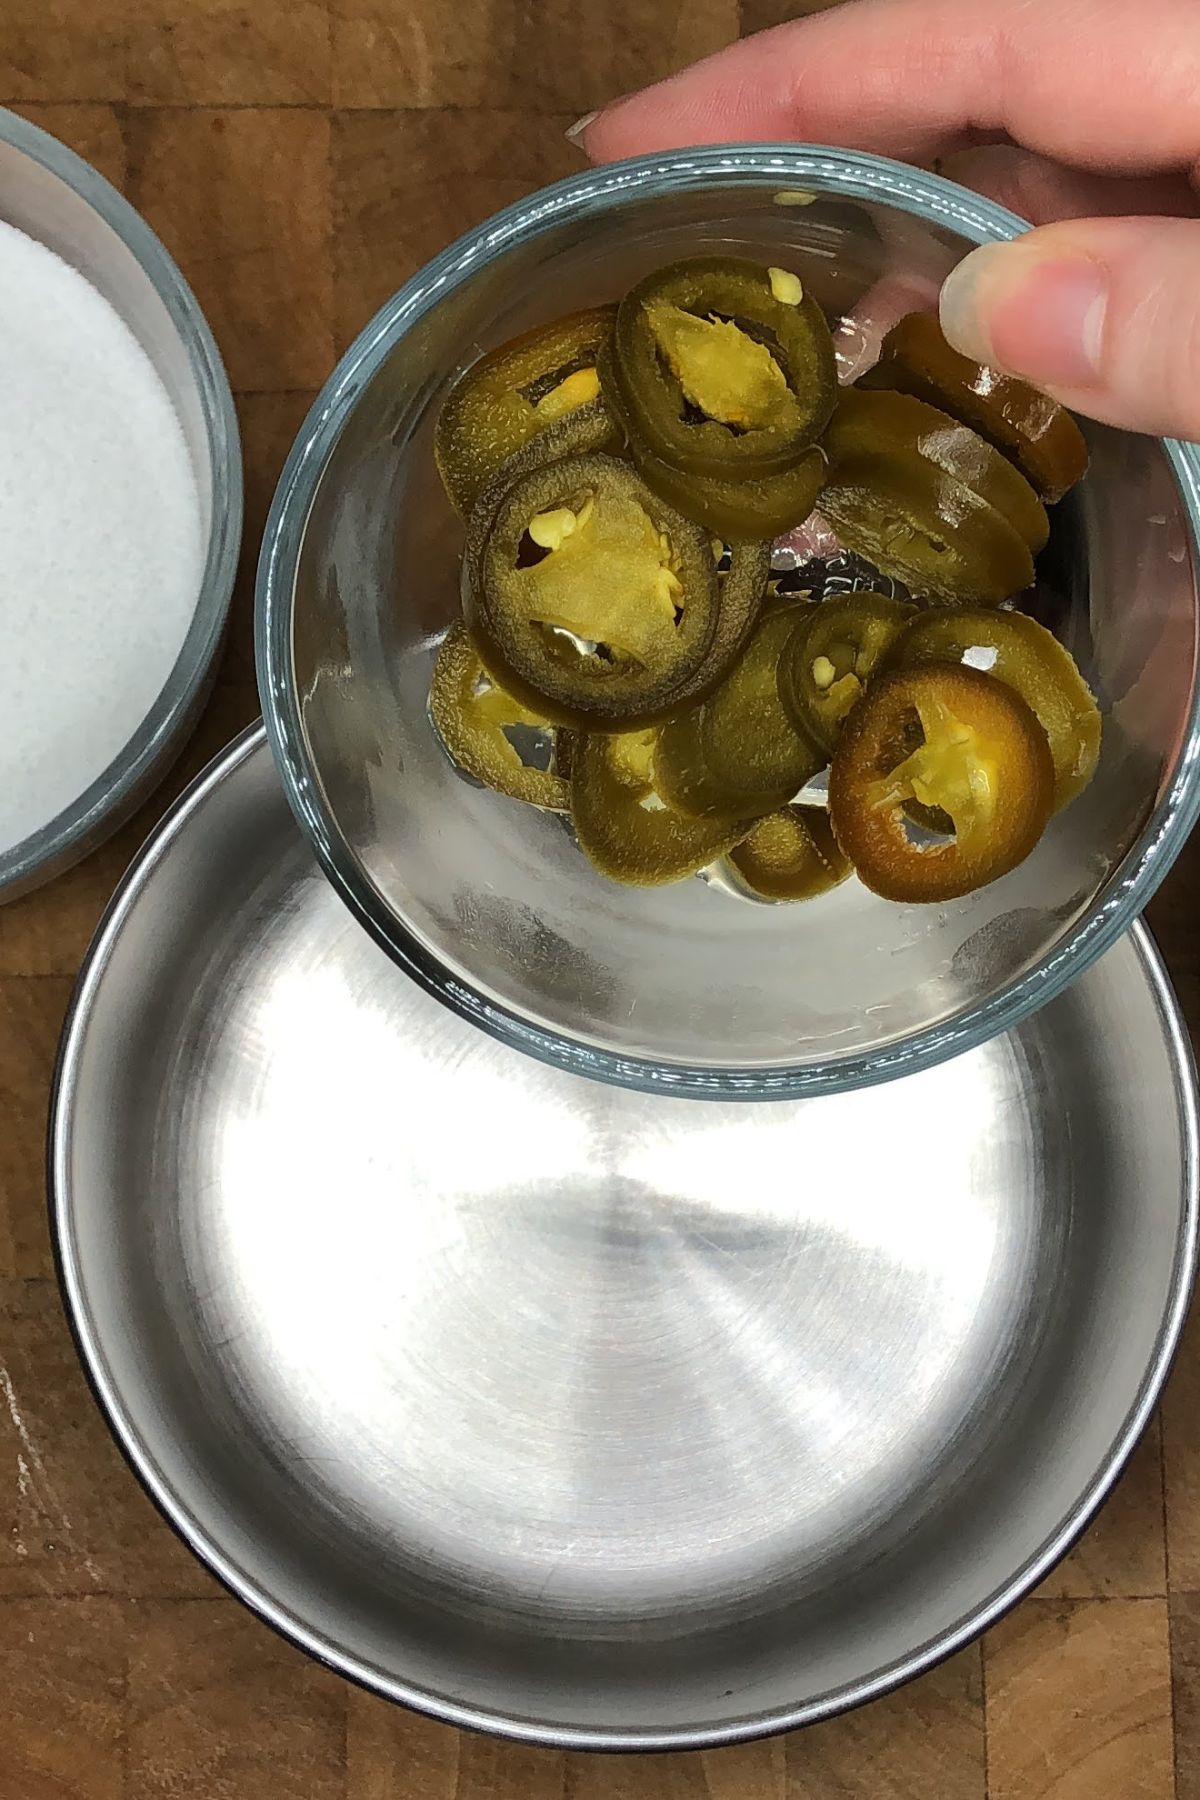 Pouring jalapeno slices into a pot.